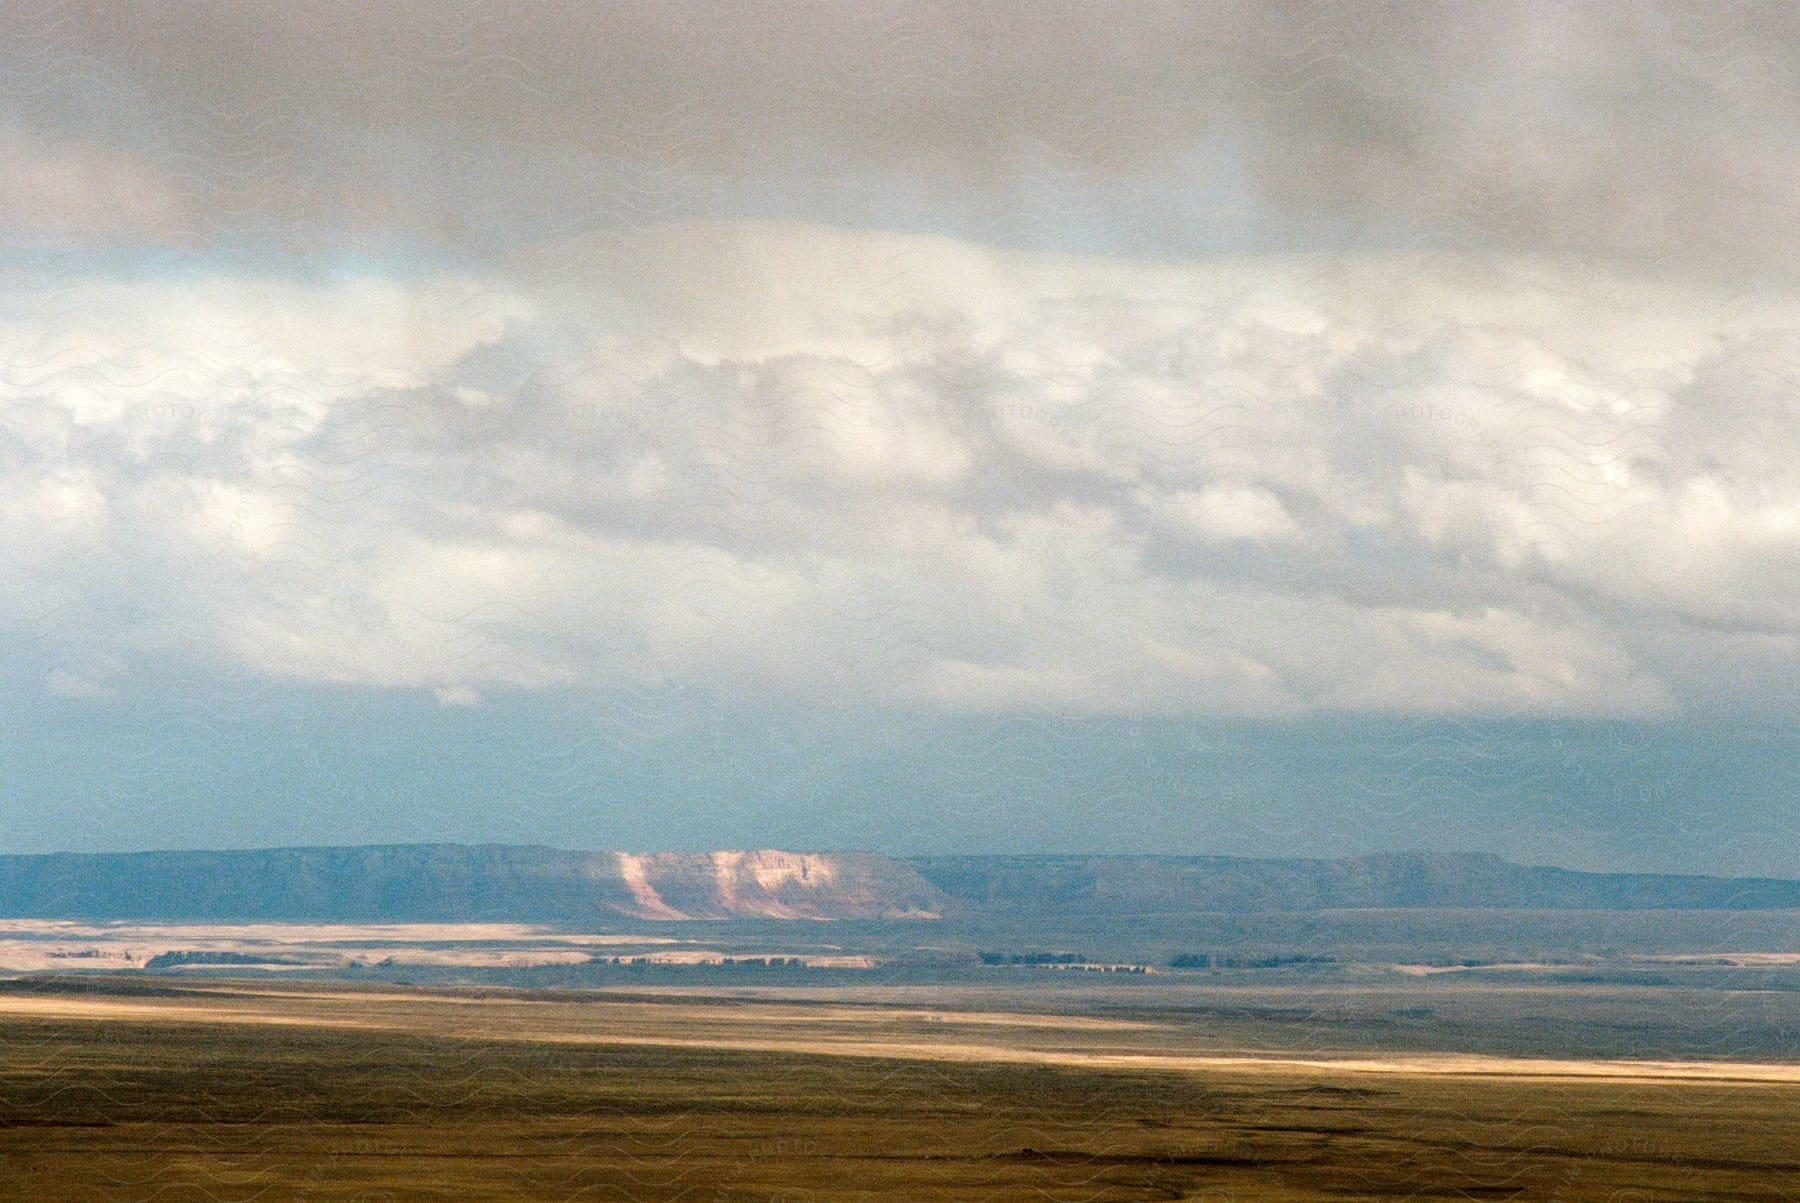 Grassland with distant mountains and thick white clouds in south west usa